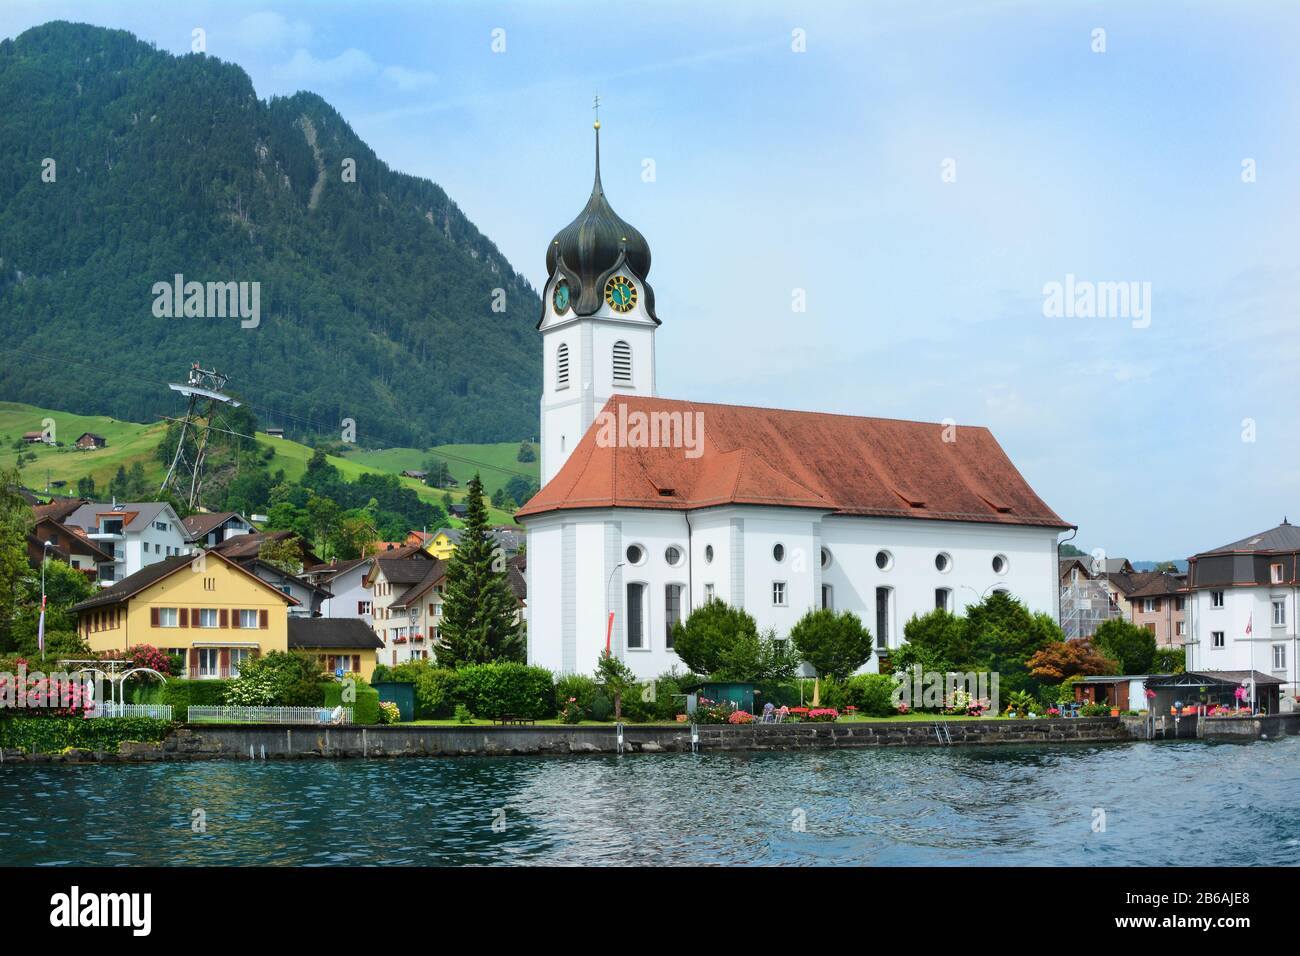 BECKENRIED, SWITZERLAND - JULY 4, 2014: St. Heinrich Church in Beckenried on the banks of  Lake Lucerne. Beckenried is a town in the canton of Nidwald Stock Photo